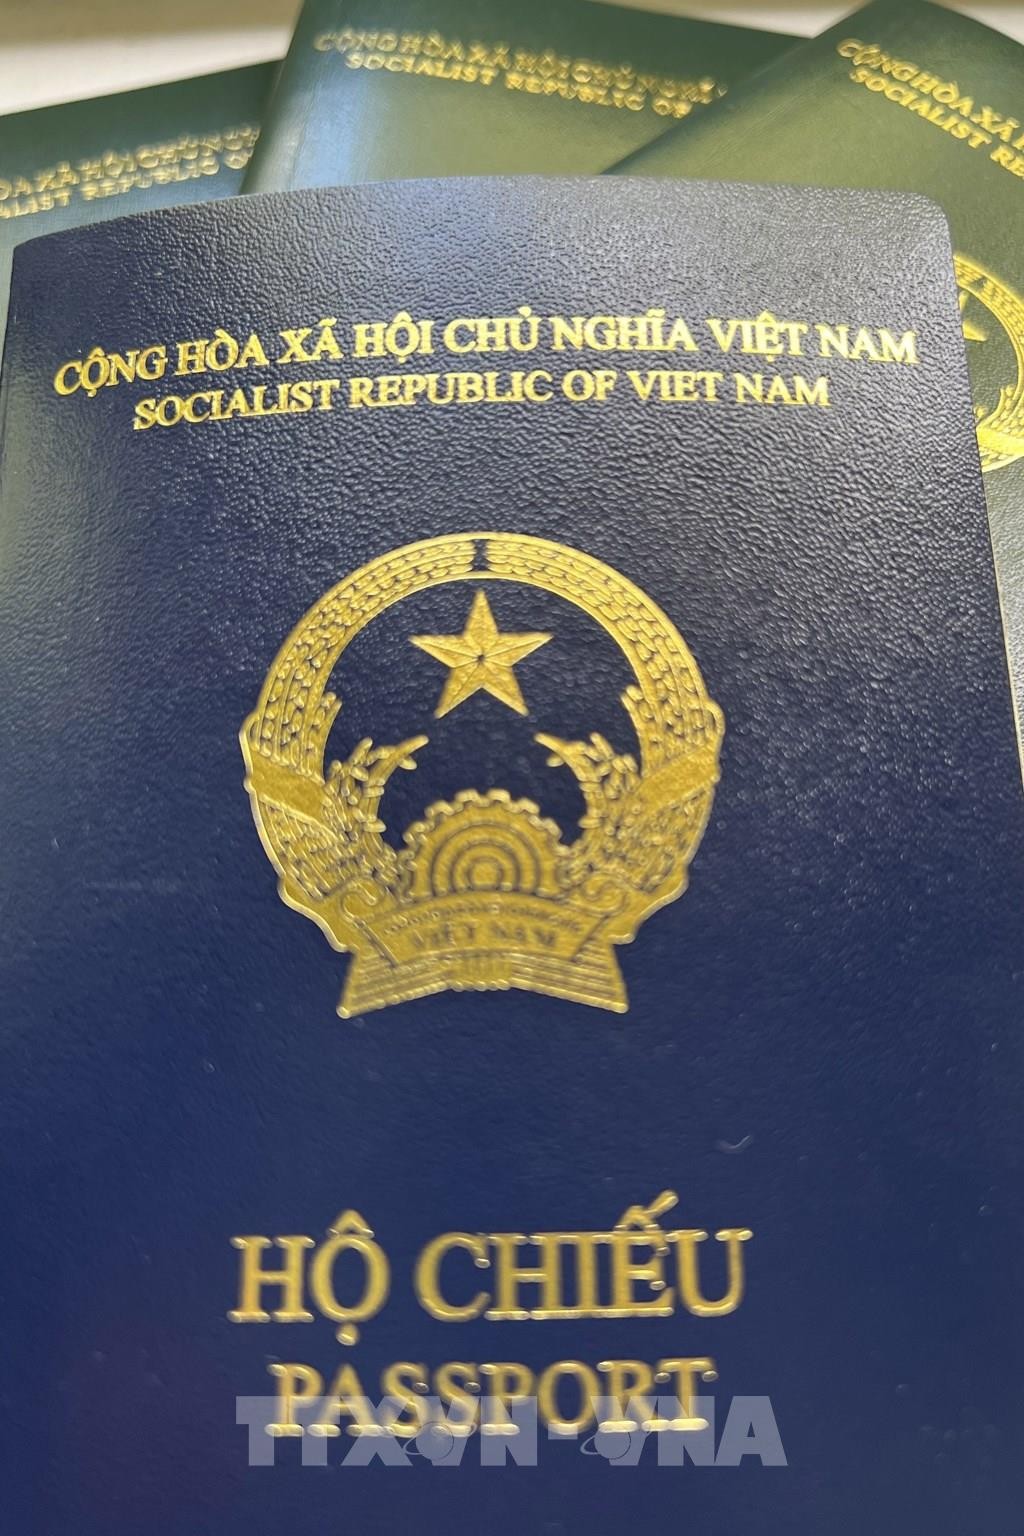 Birthplace information to be included in new Vietnamese passports